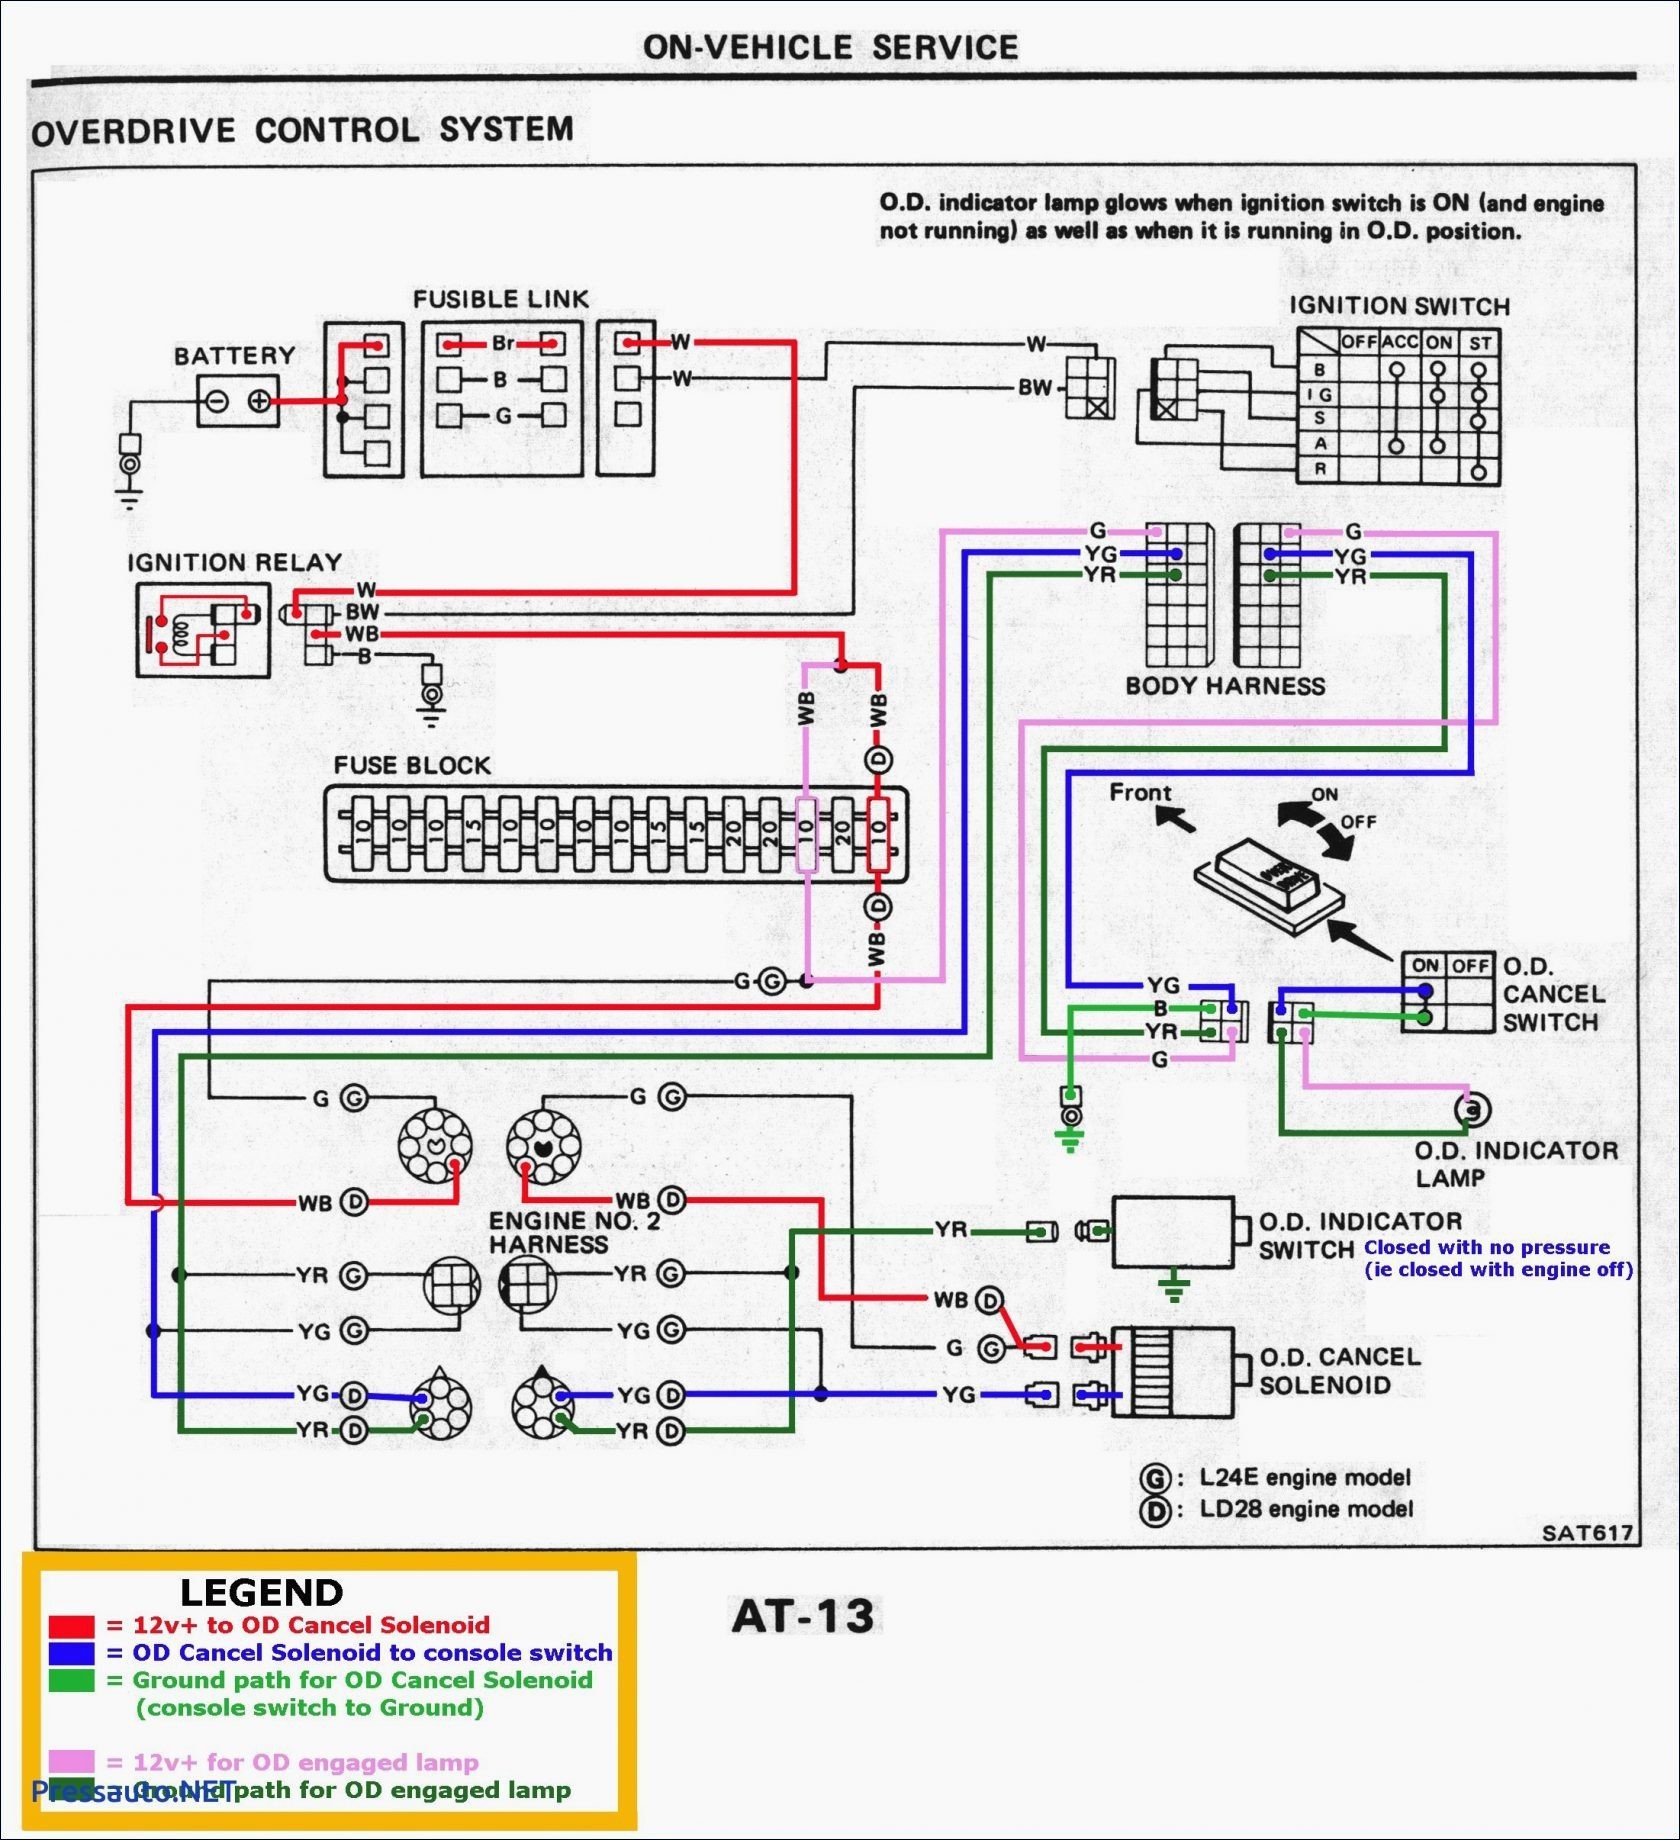 Wiring Diagram 50 Amp Plug Best How to Wire An Outlet From Another Outlet Diagram Awesome